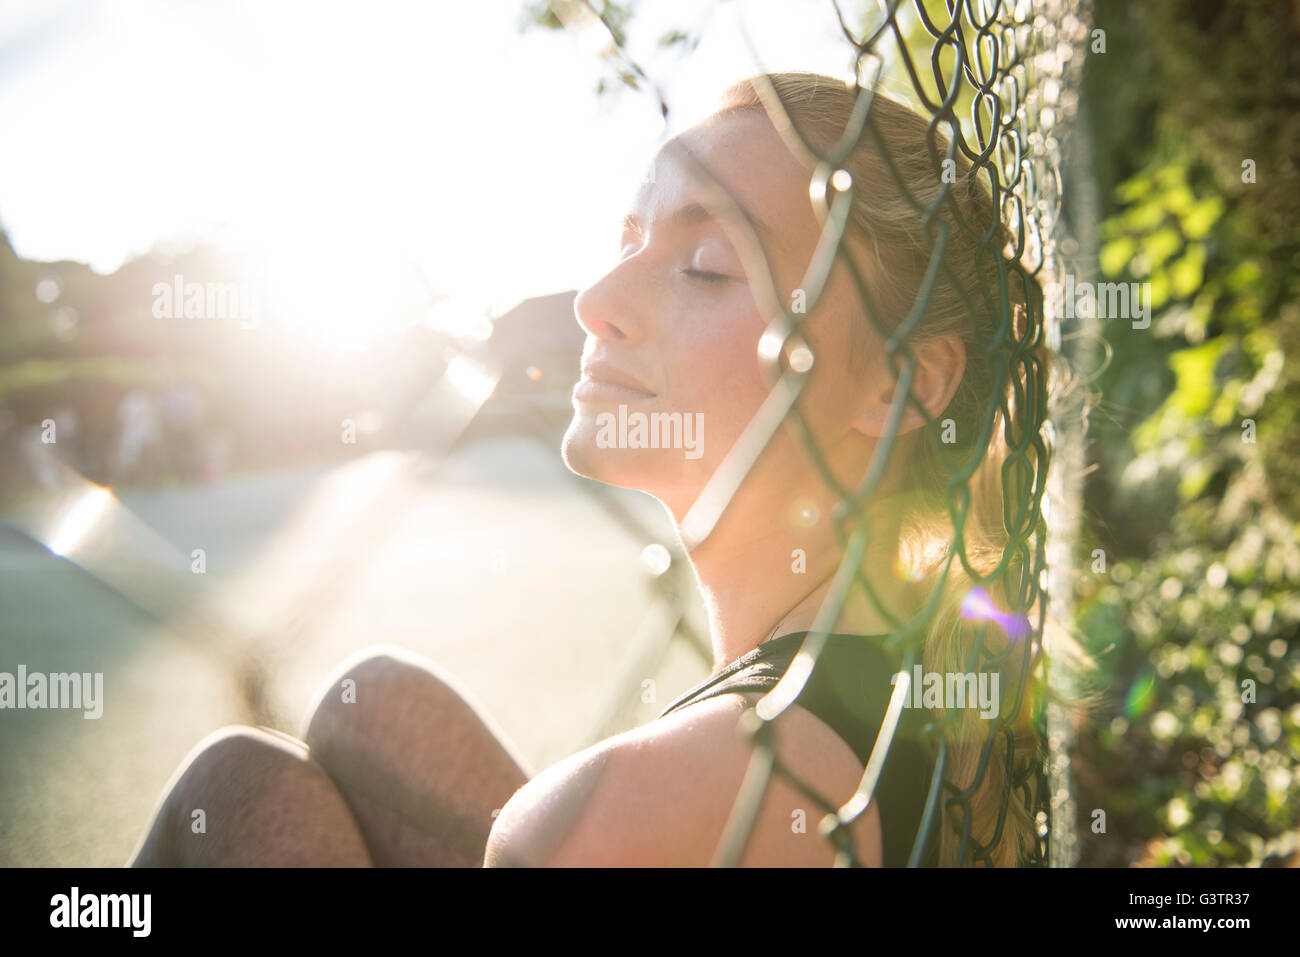 A young woman enjoying the evening sunshine sat on a tennis court. Stock Photo